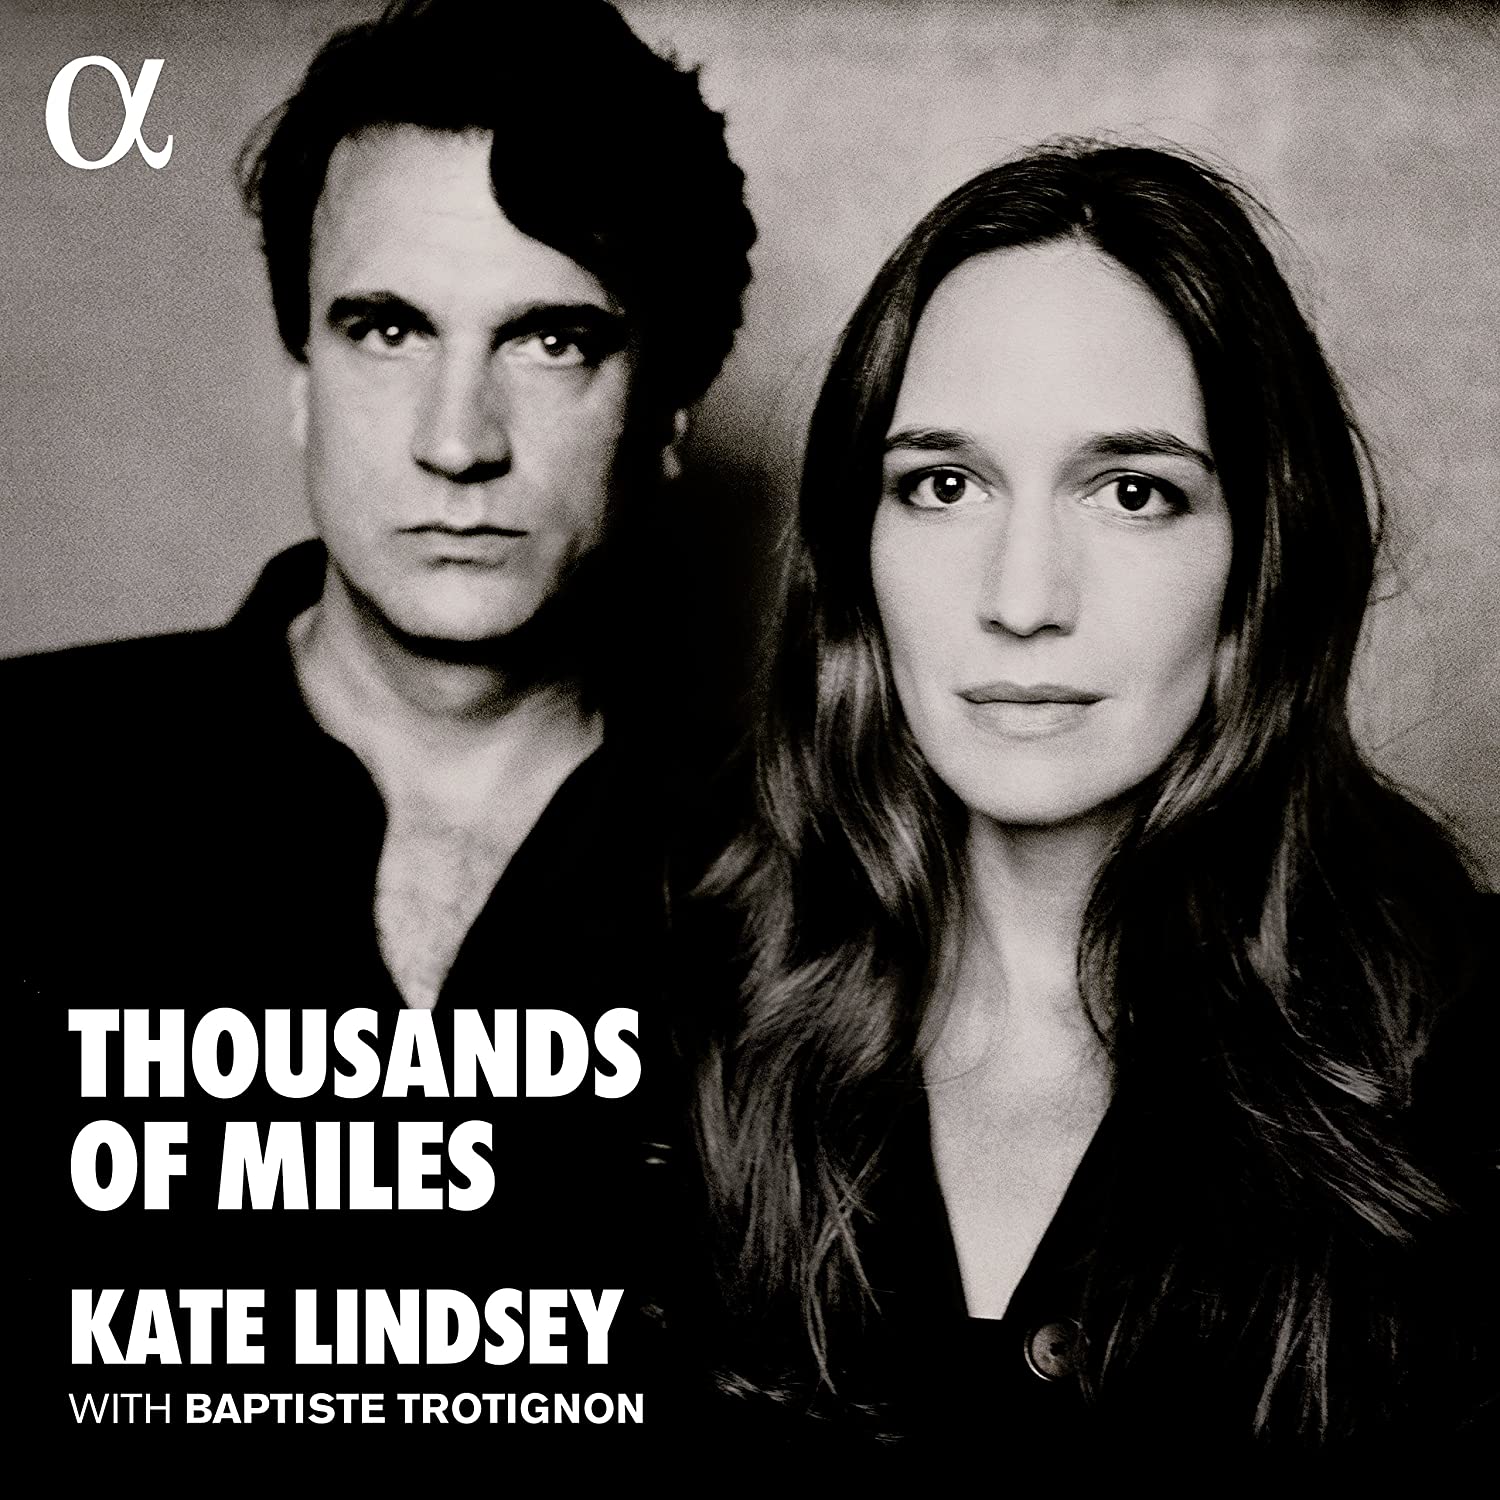 Kate Lindsey - Thousands of Miles